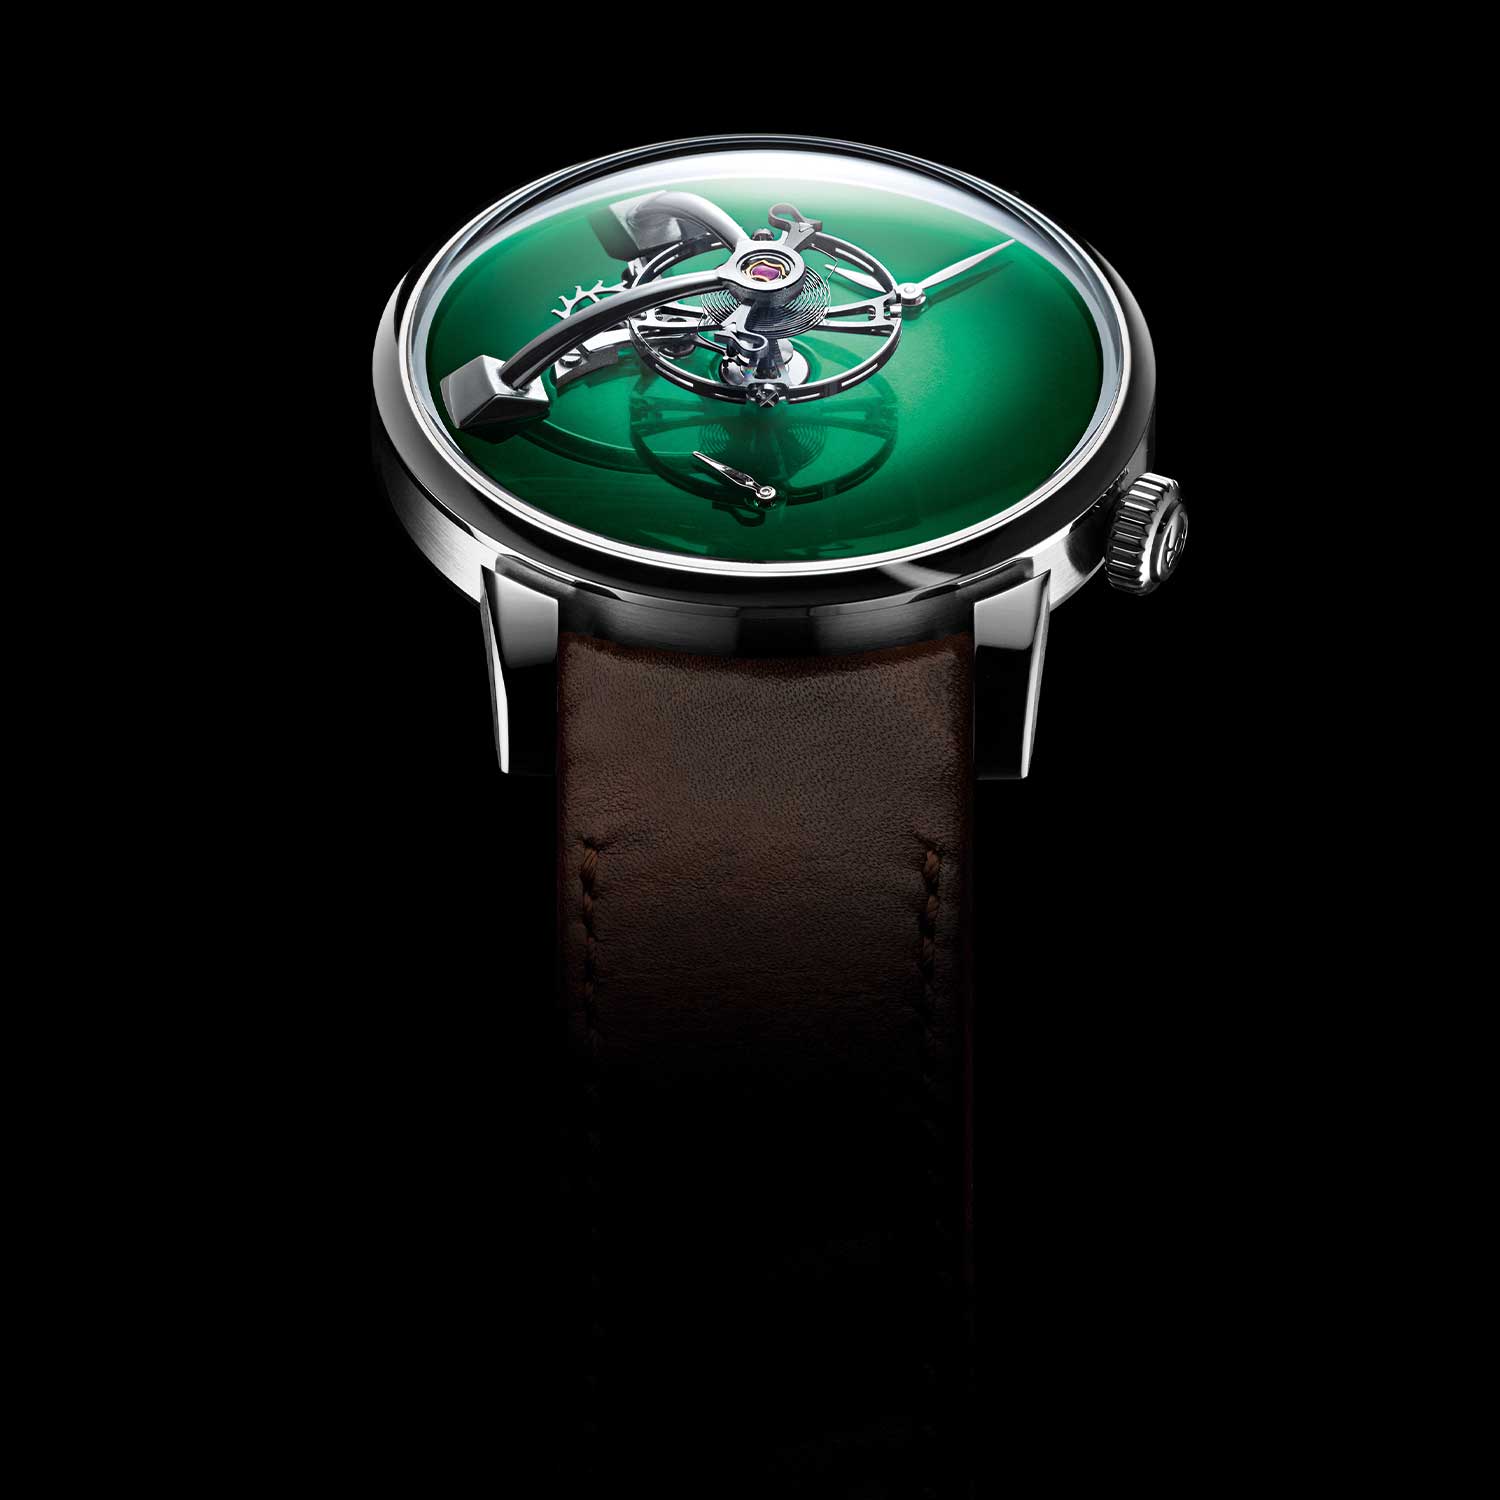 MB&F × H. Moser LM101 in Cosmic Green